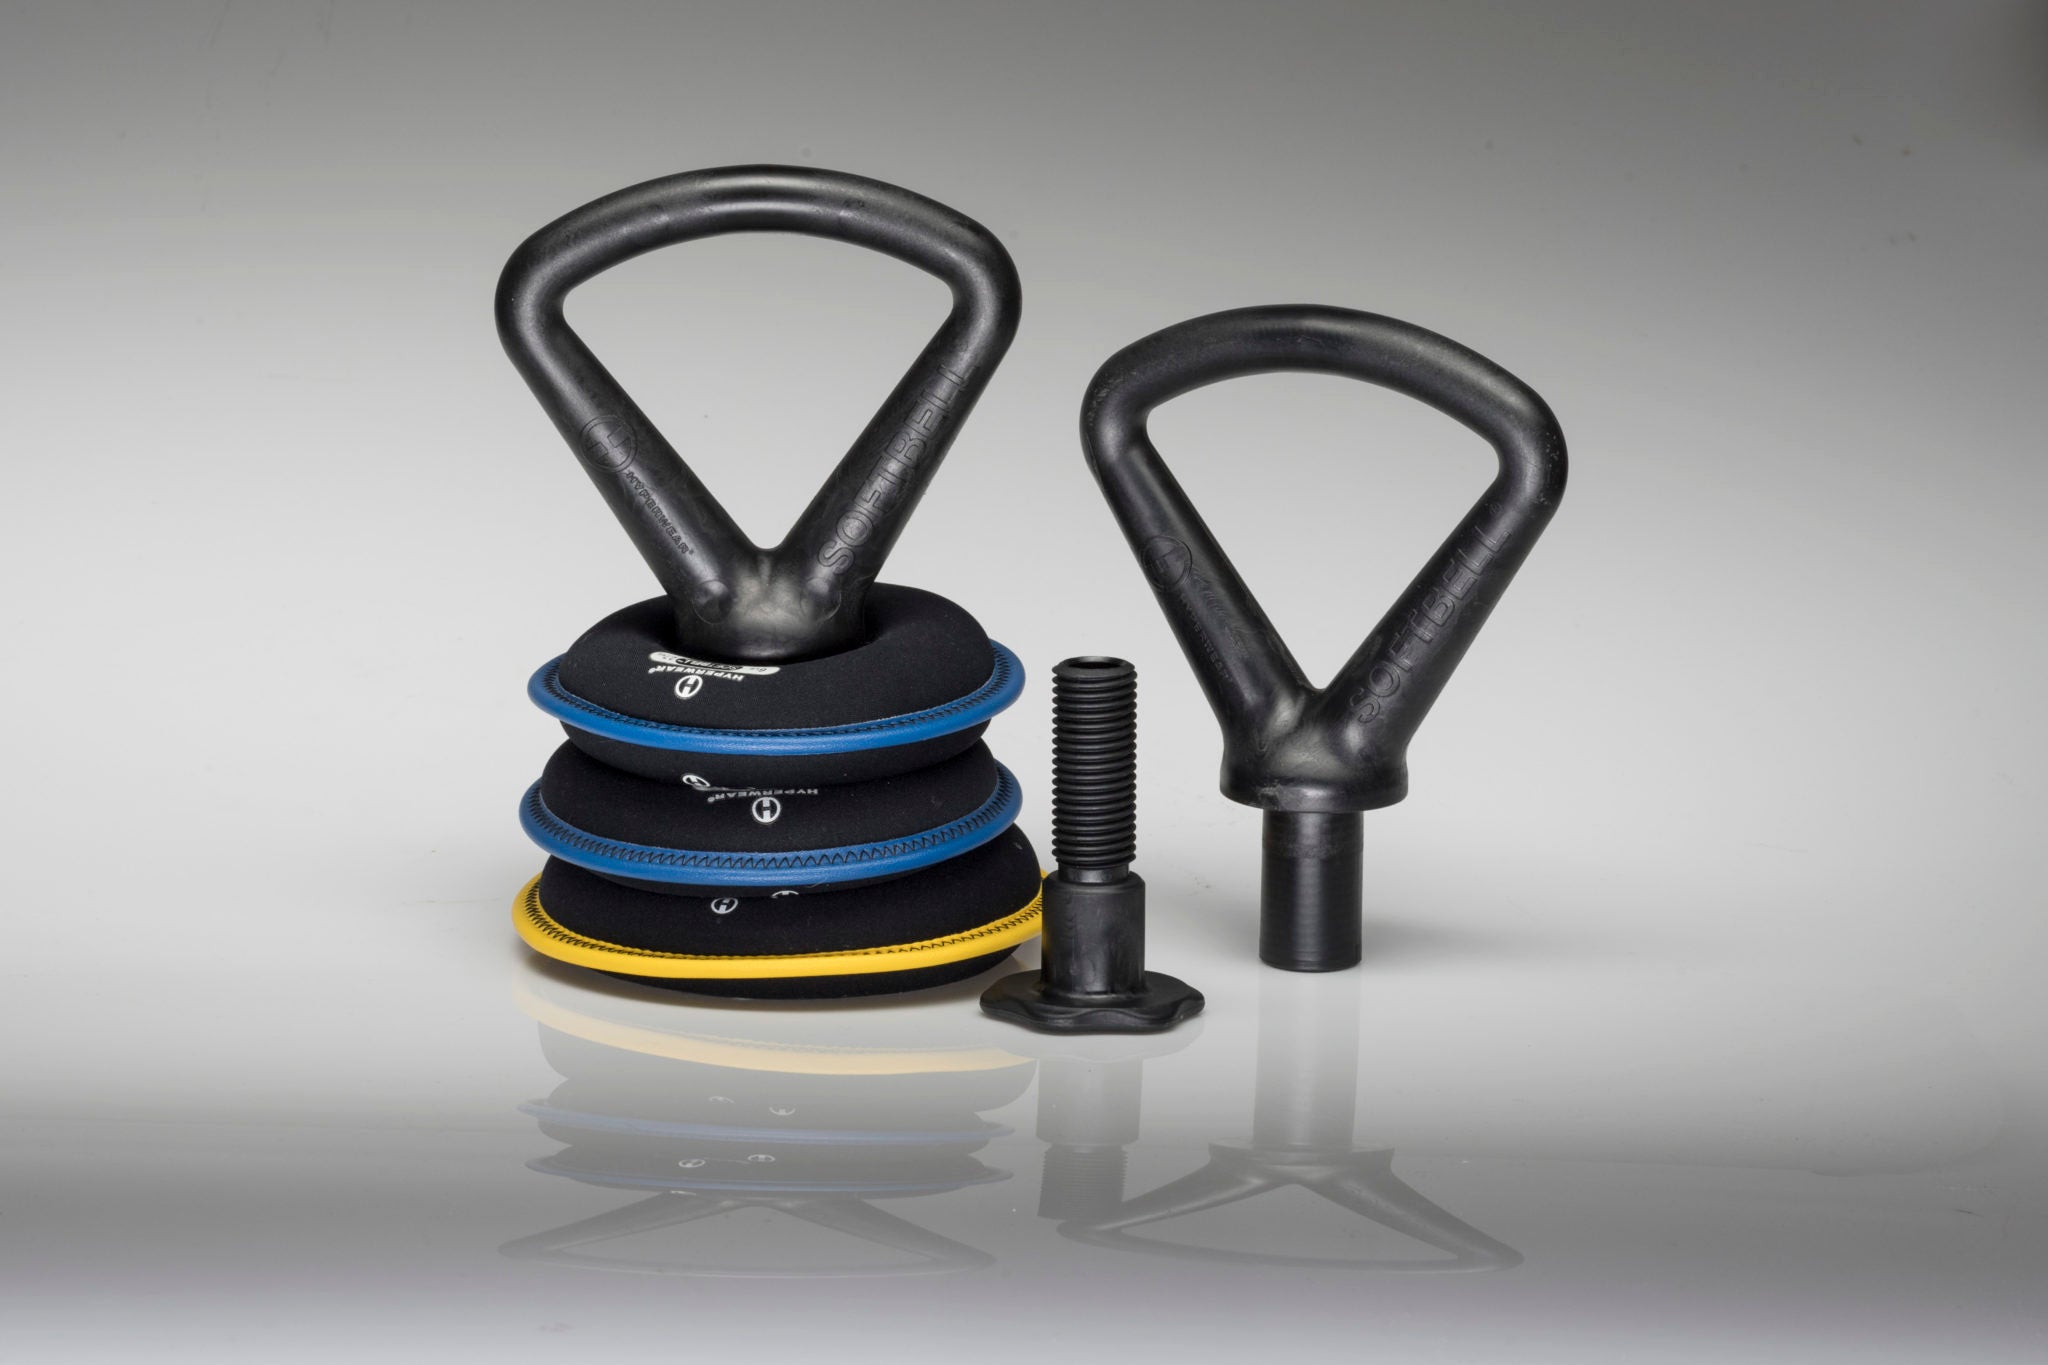 Product image of assembled soft kettlebell set next to the kettlebell handle for plates and bolt